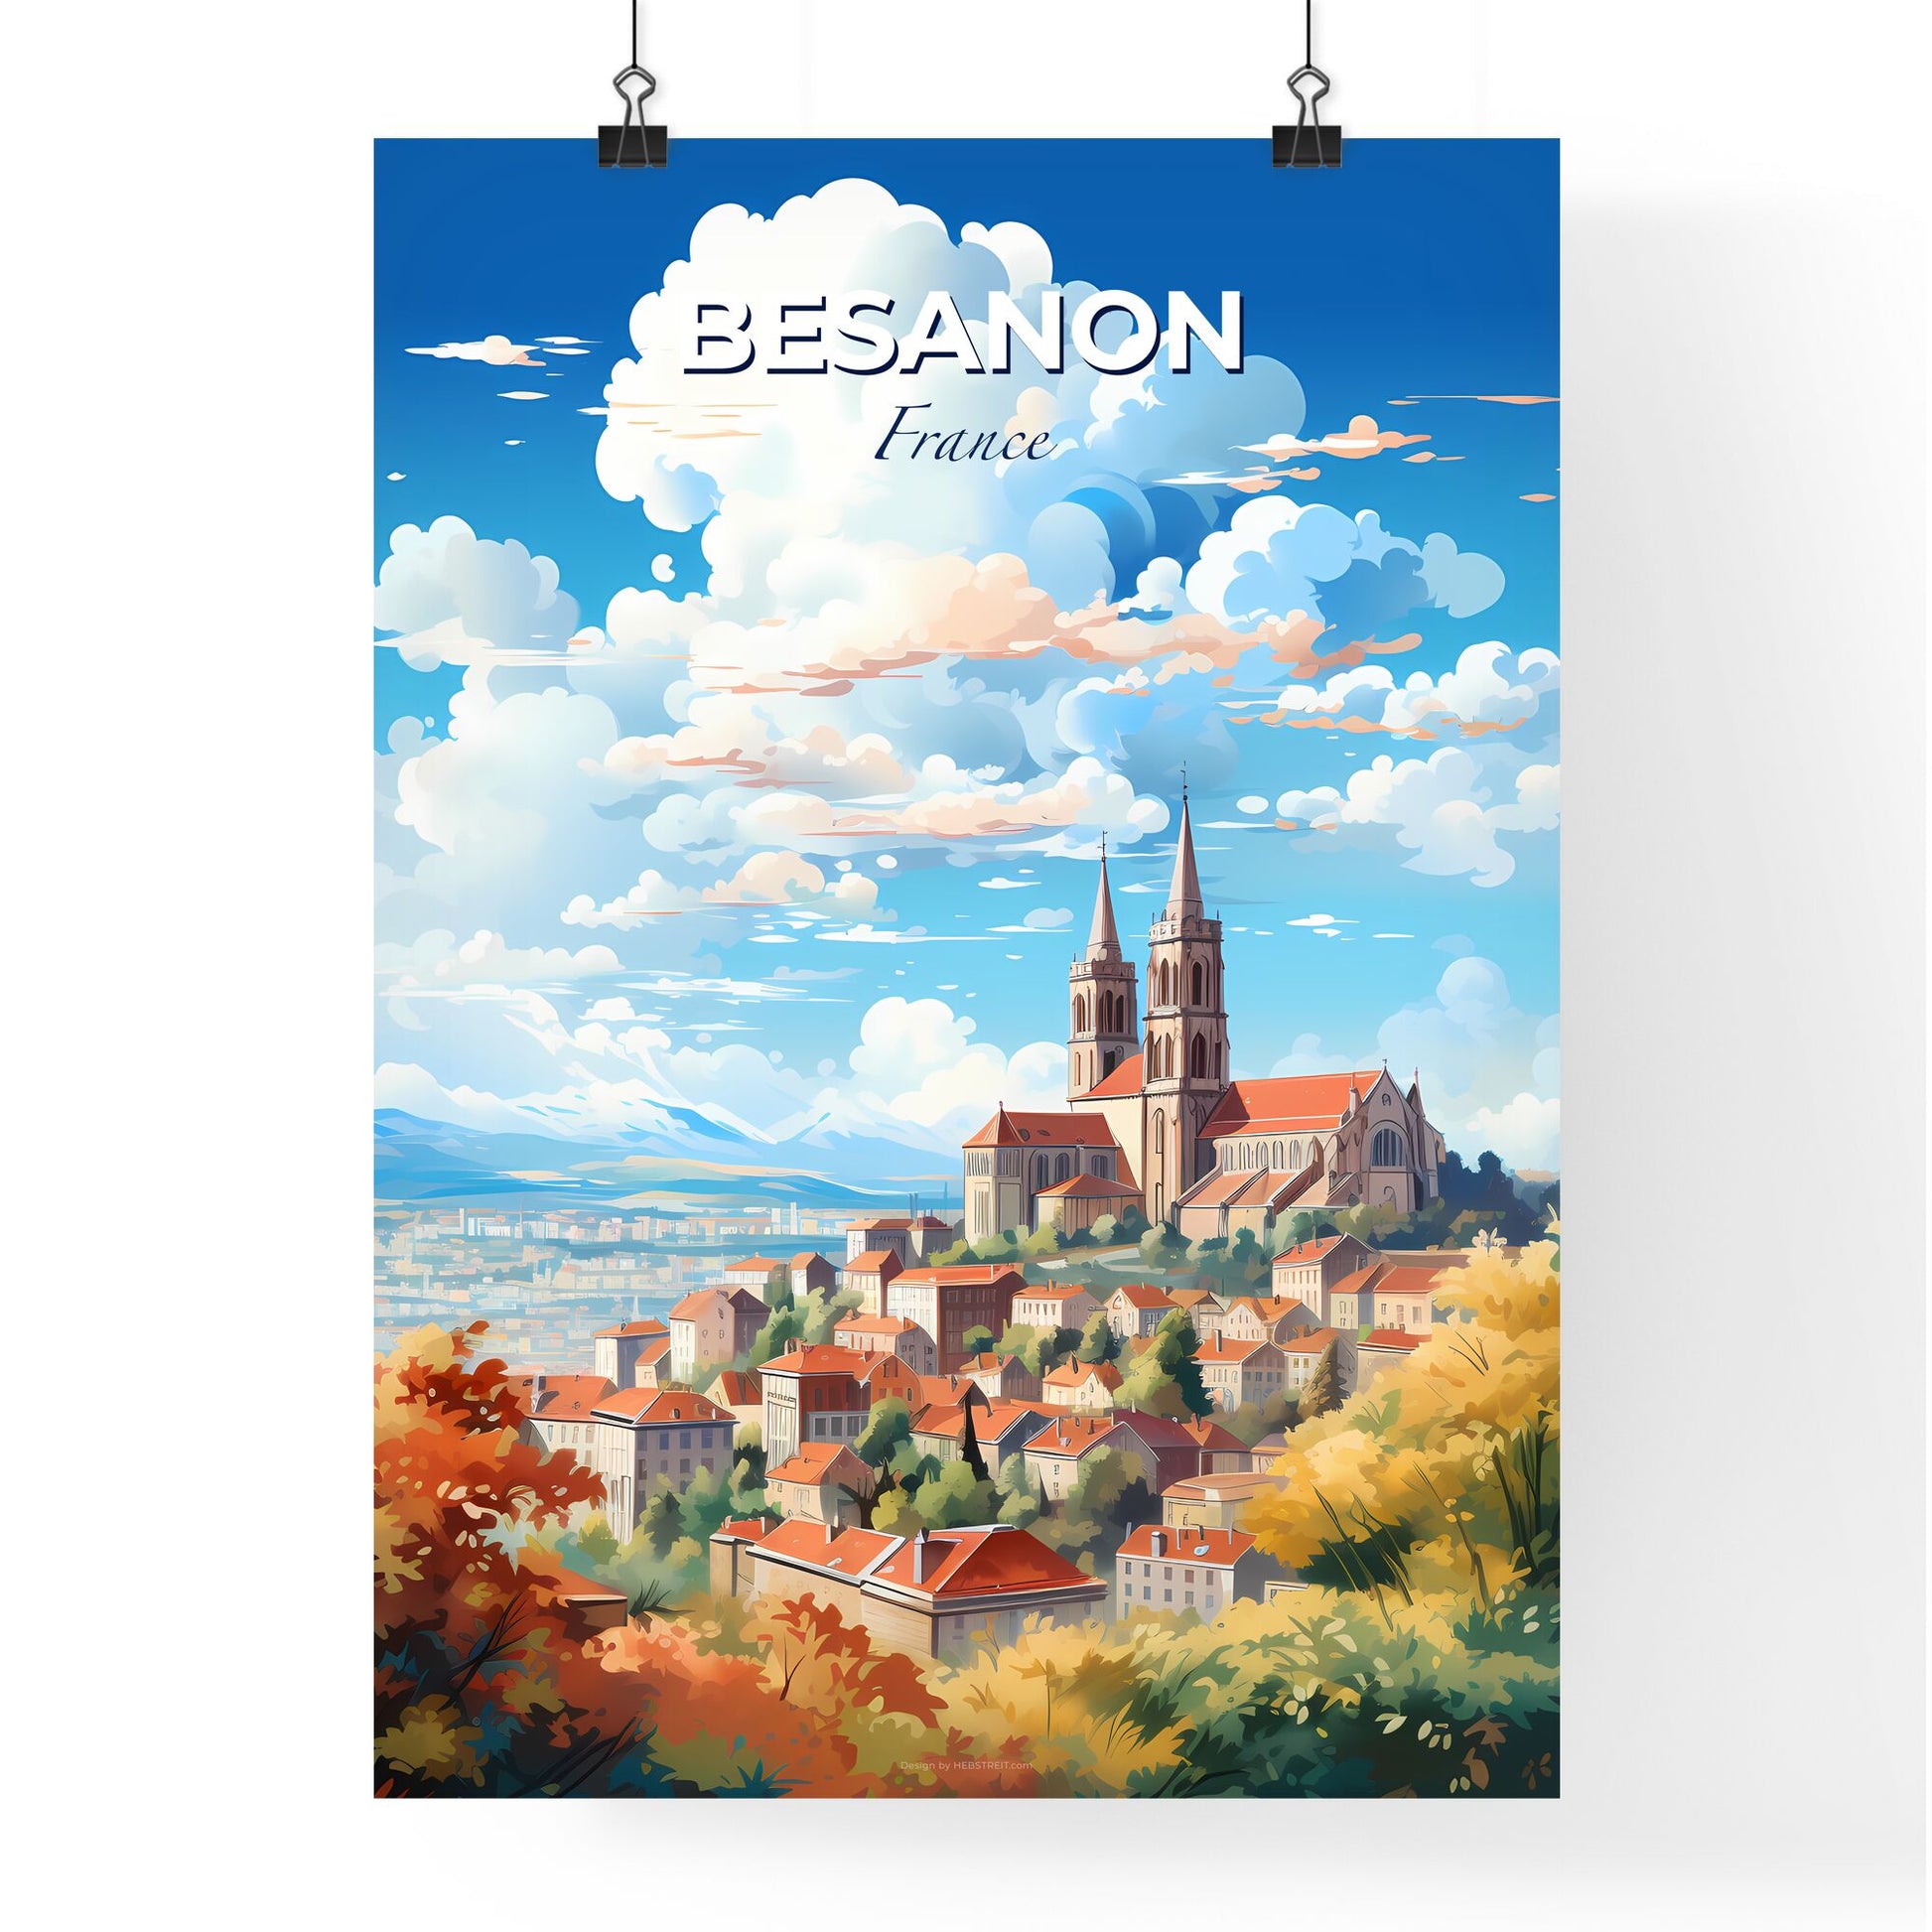 Besanon France Skyline - A City With A Church And Trees - Customizable Travel Gift Default Title